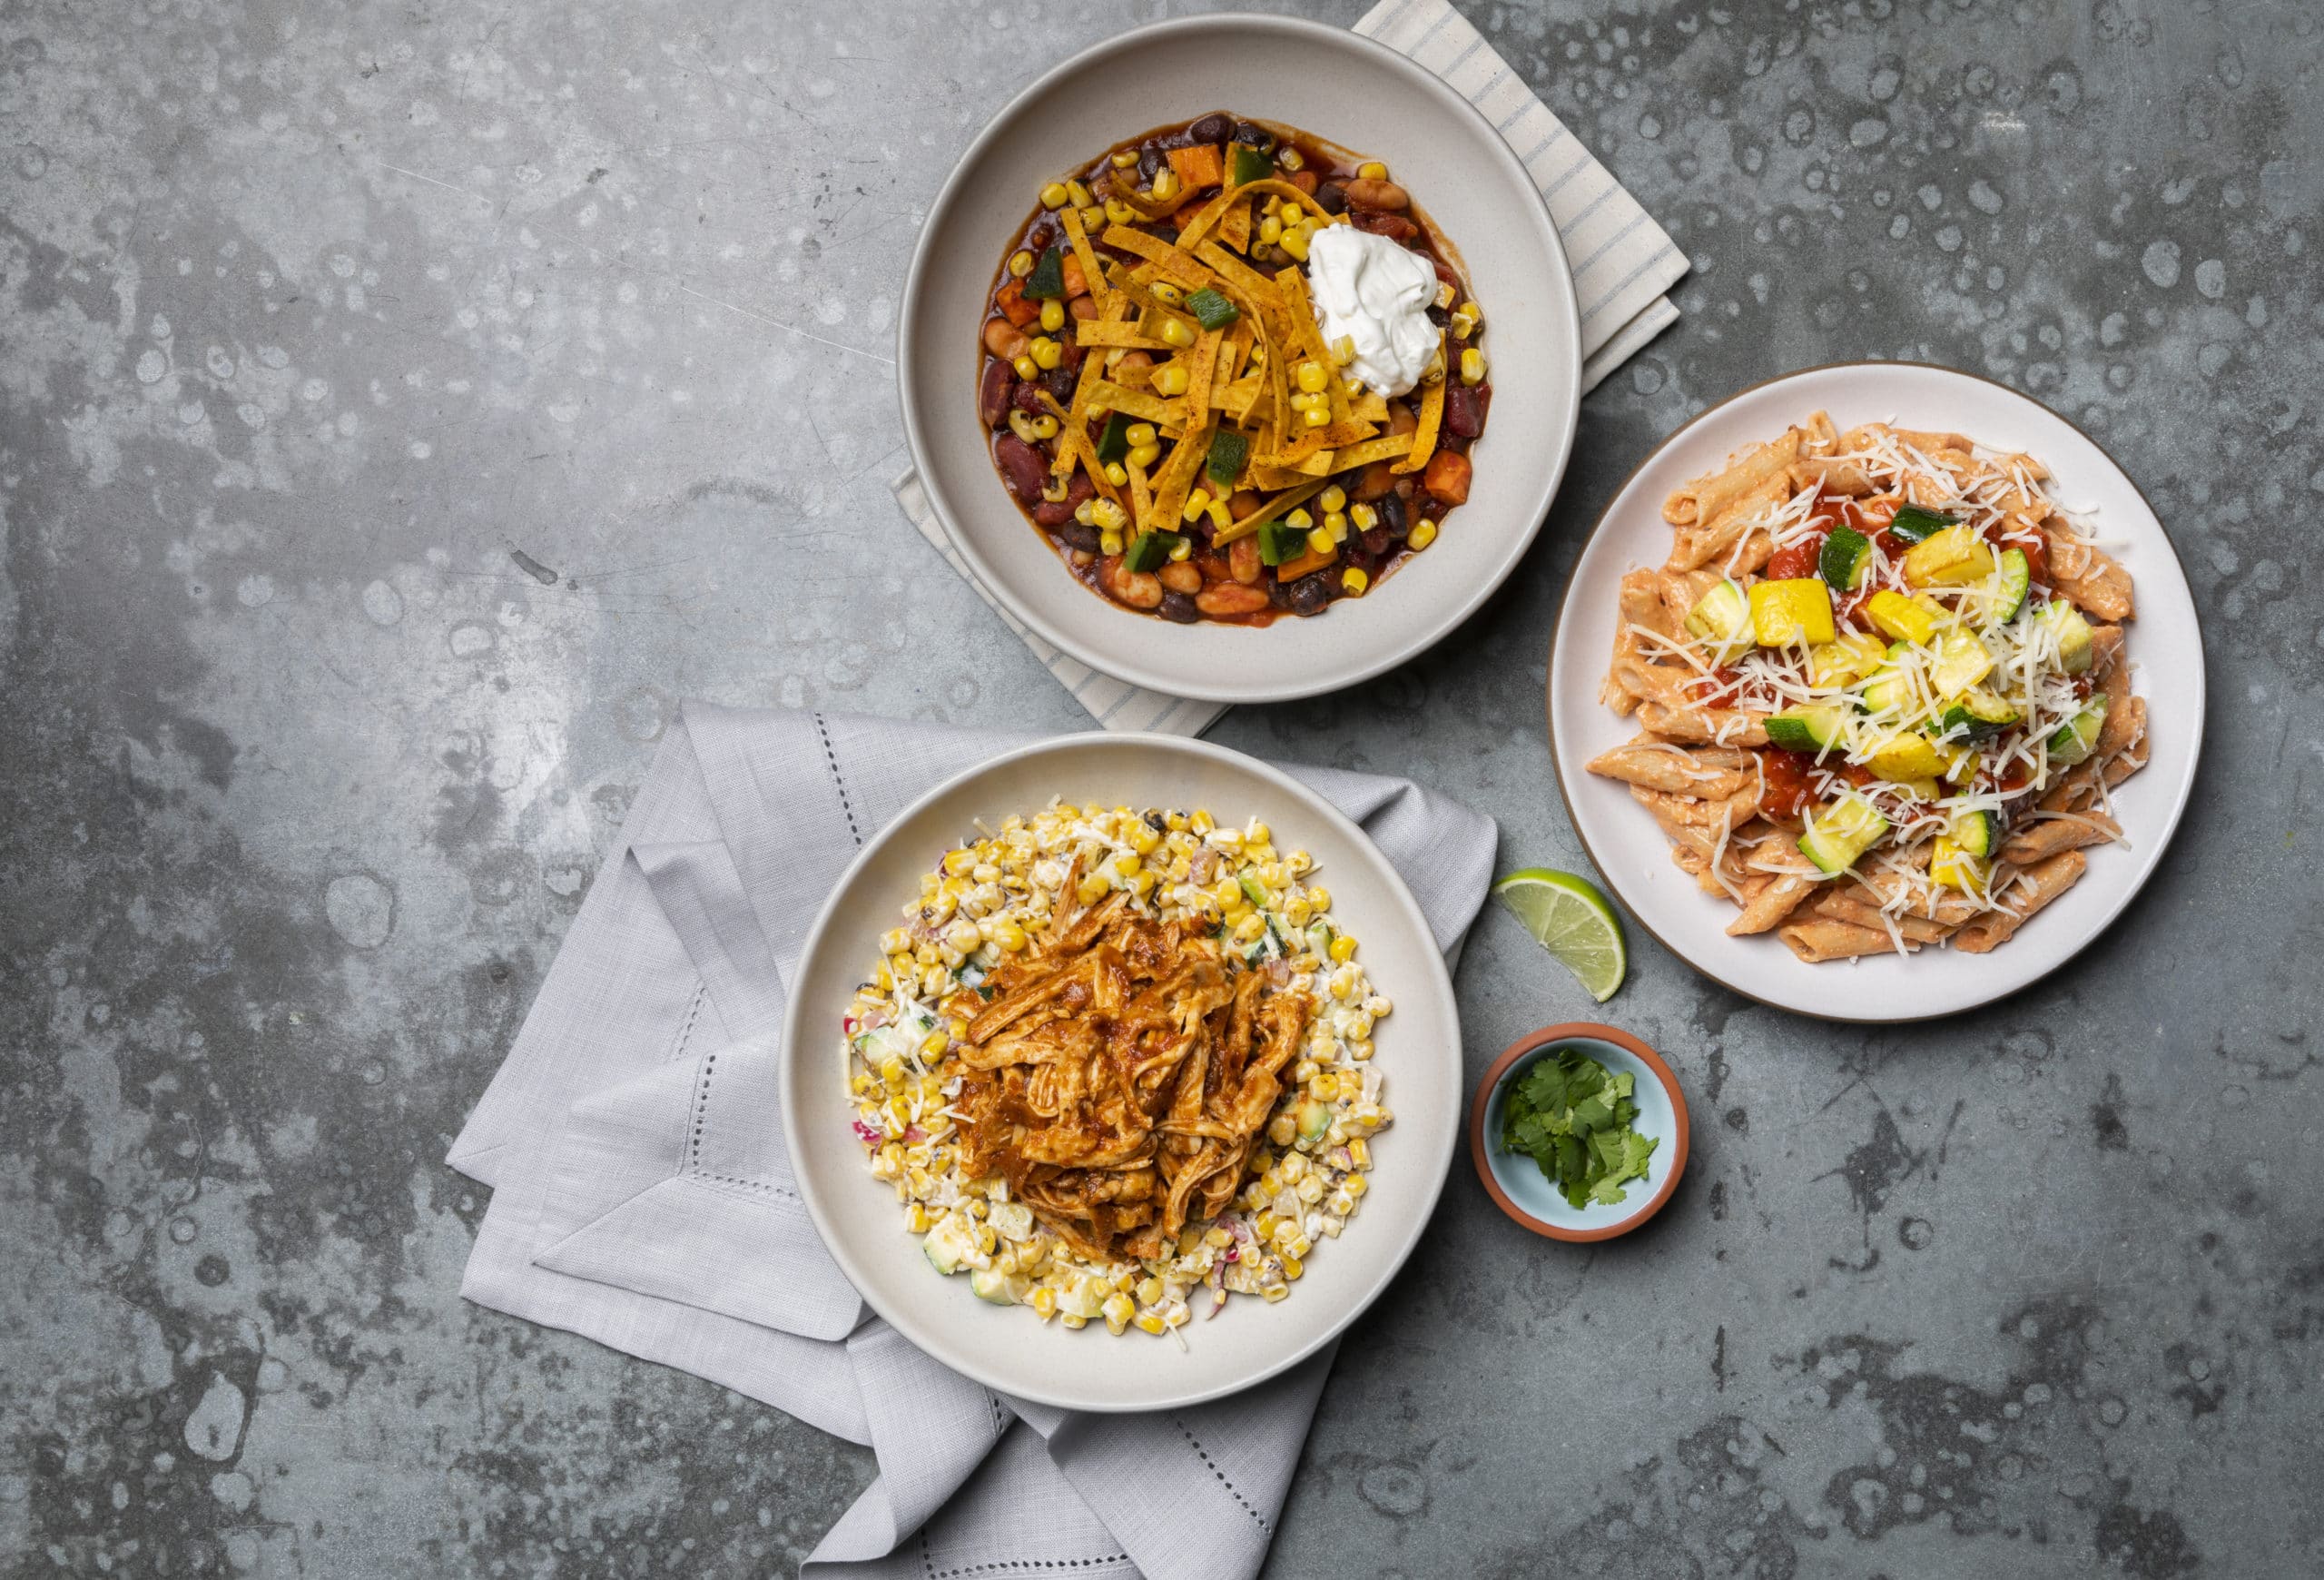 Three new Snap Kitchen meals - chili, pasta primavera, and chicken tinga with fire roasted corn